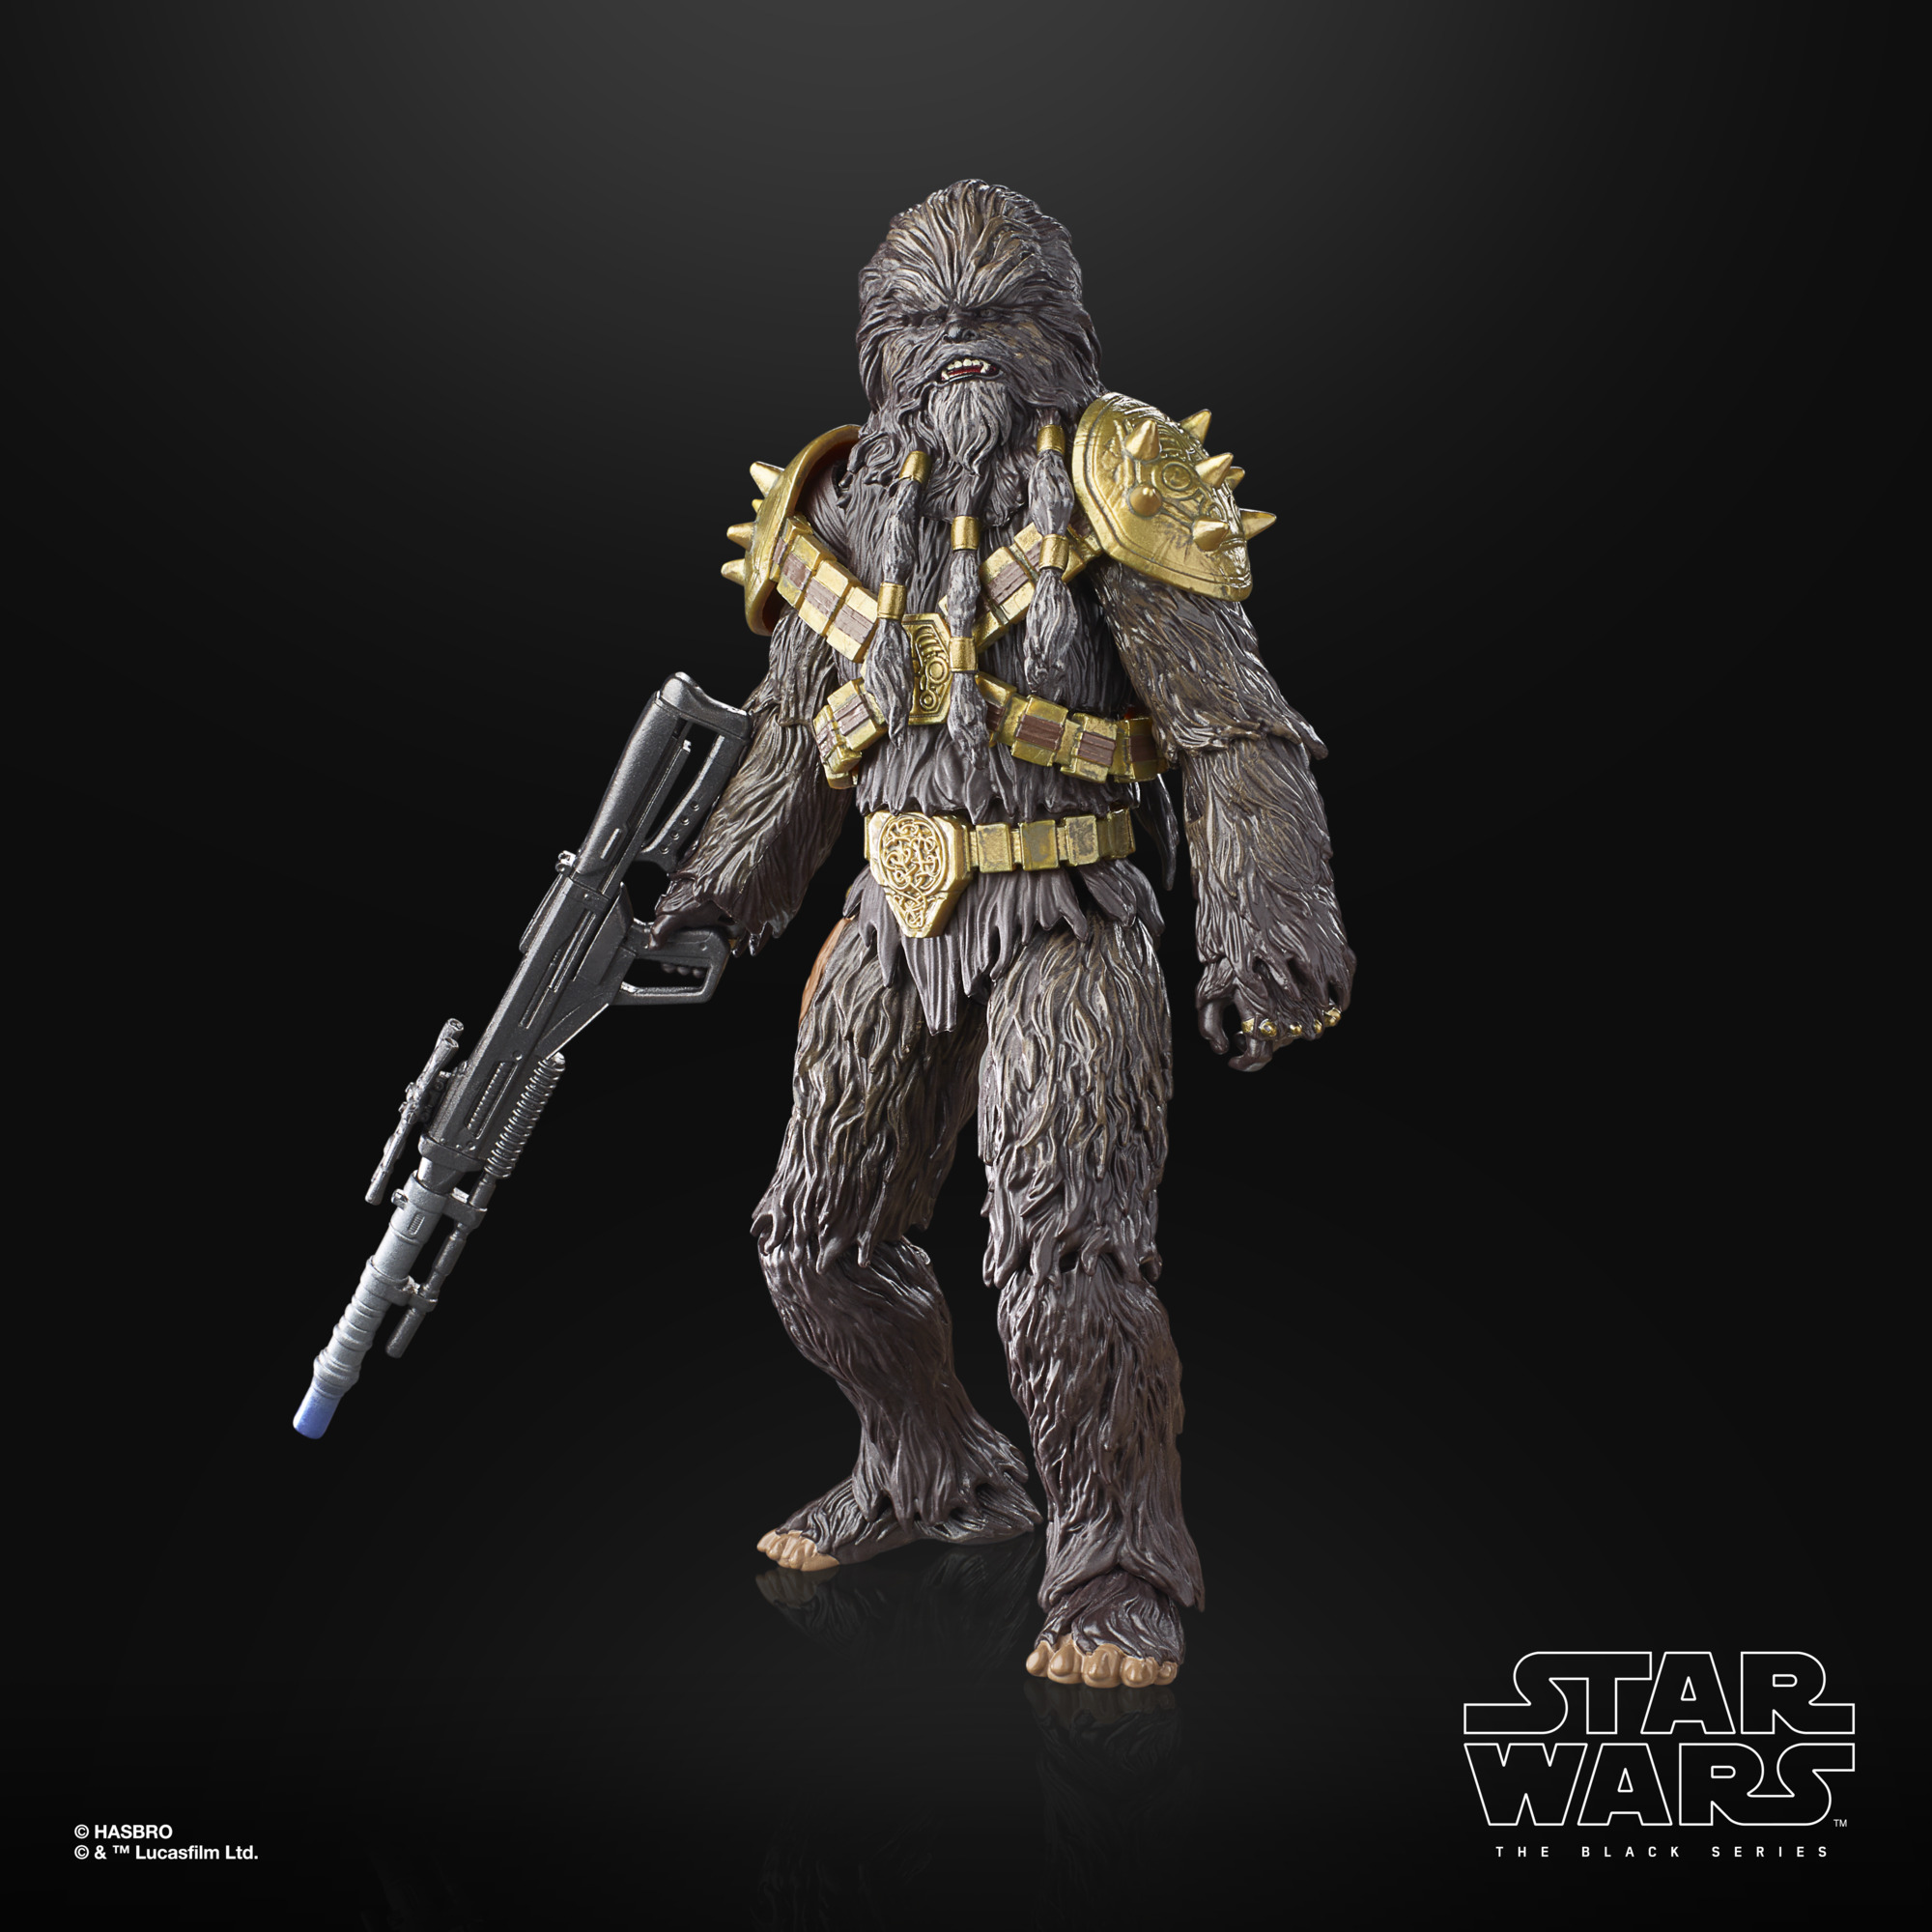 Hasbro: New Star Wars Vintage Collection and Black Series figures revealed